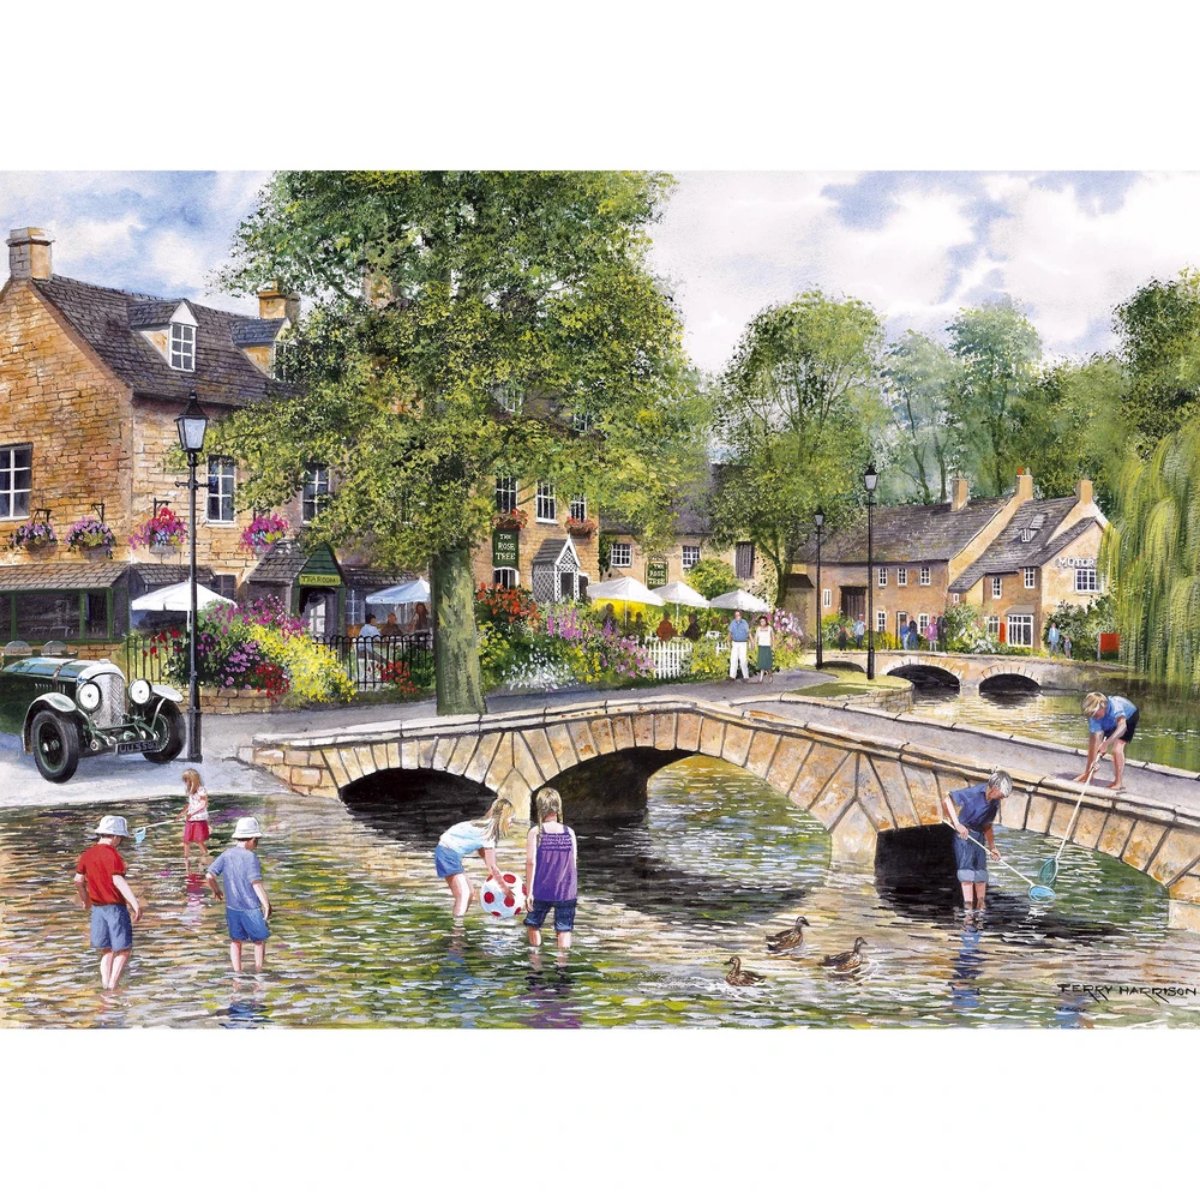 Gibsons Bourton on The Water 1000 Piece Jigsaw Puzzle - Image Terry Harrison